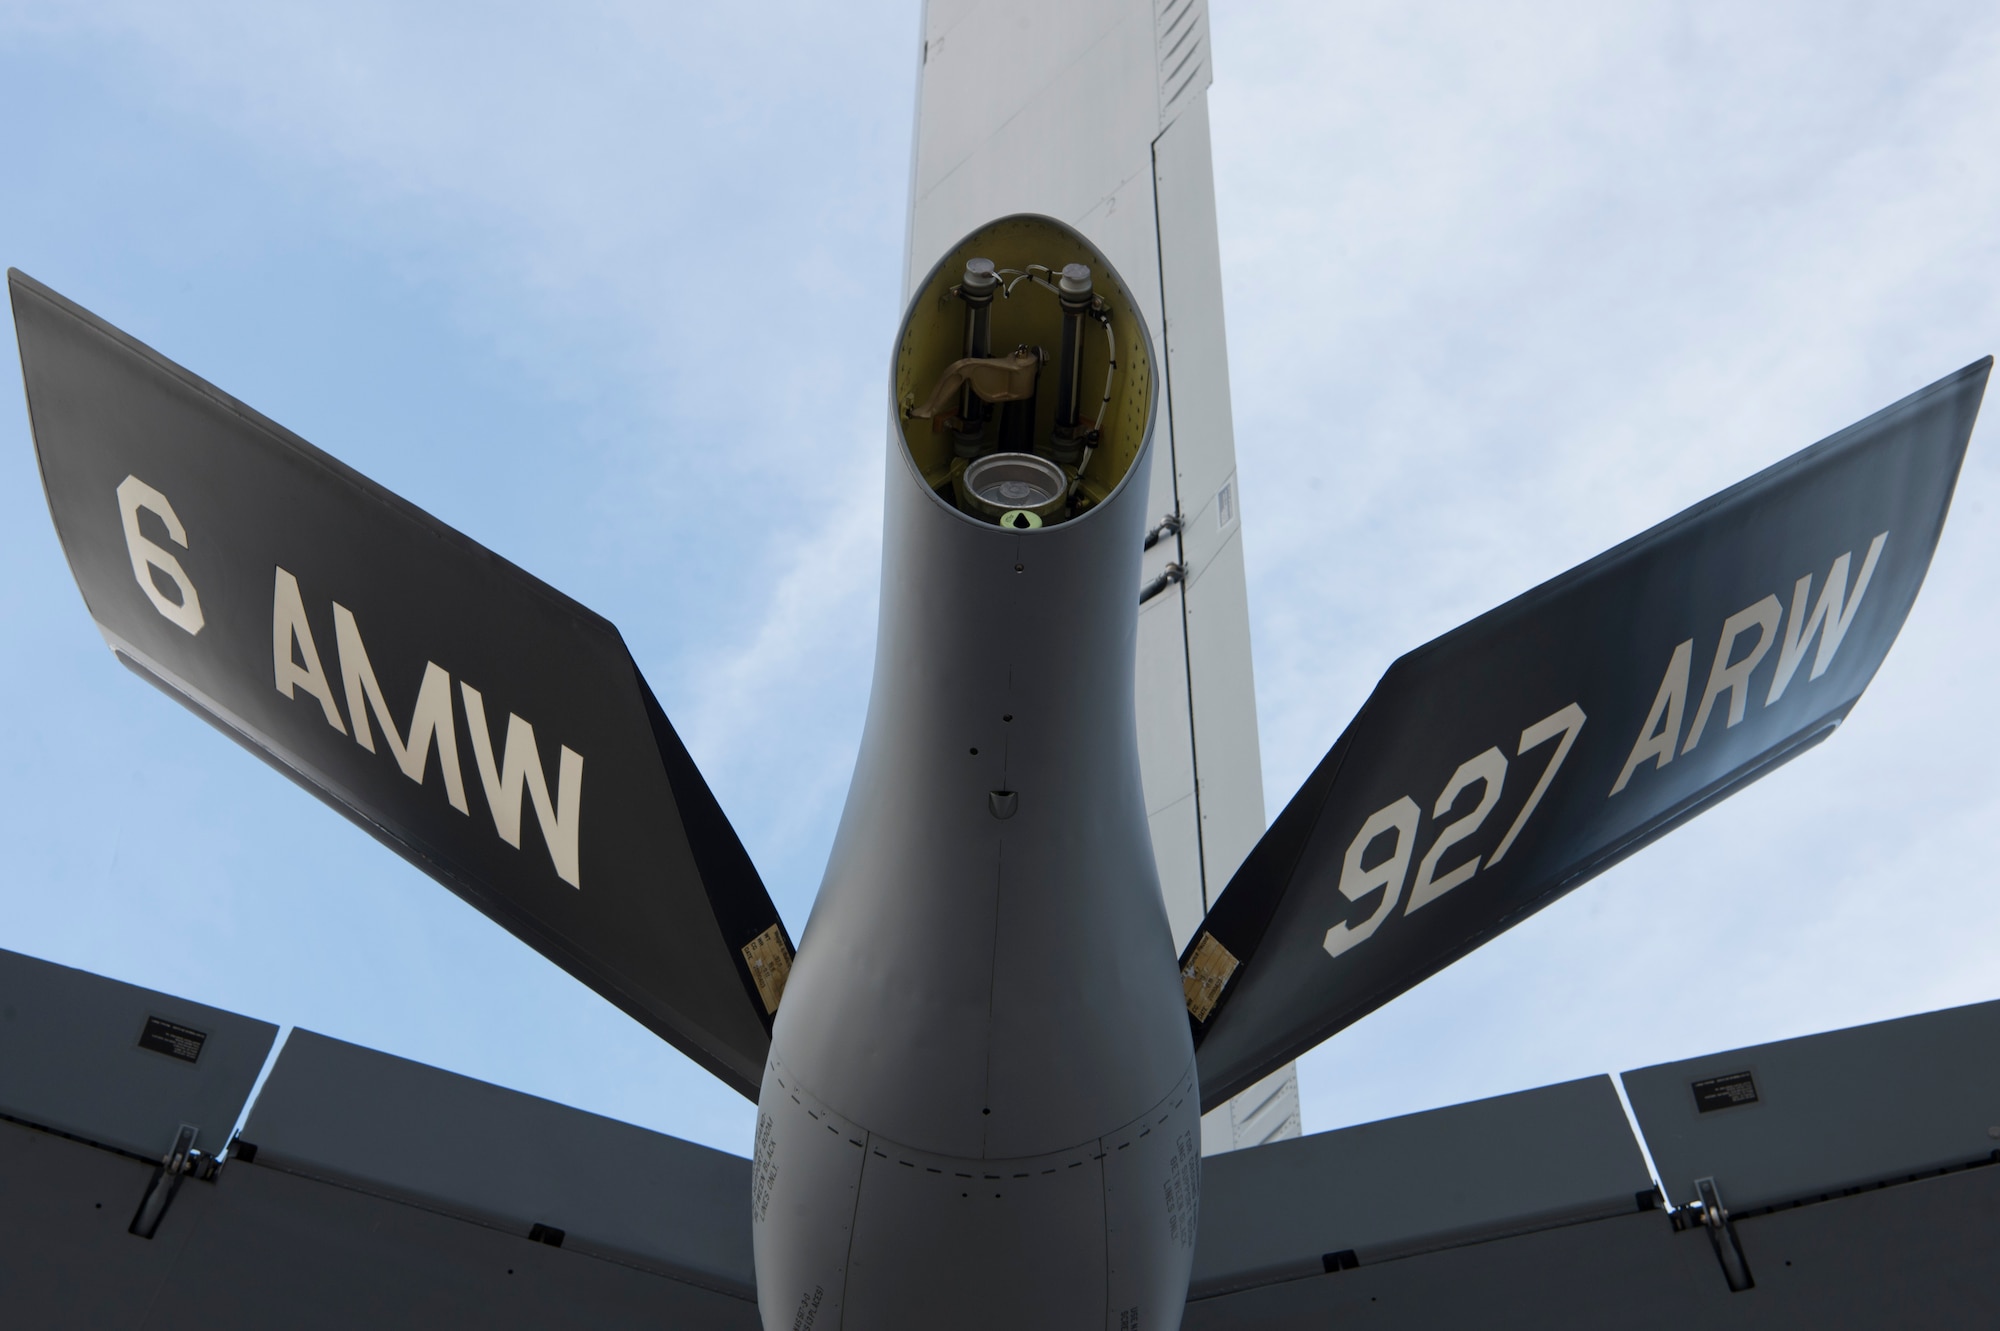 The boom tail flashes of the 6th Air Mobility Wing (AMW) and the Air Force Reserve’s 927th Air Refueling Wing (ARW) are displayed on all KC-135 Stratotankers assigned to MacDill Air Force Base, Fla. The 6th AMW was redesignated as the 6th ARW Sept. 30, 2019. The 6th ARW is in the process of updating its boom tail flashes to reflect the wing’s new designation.